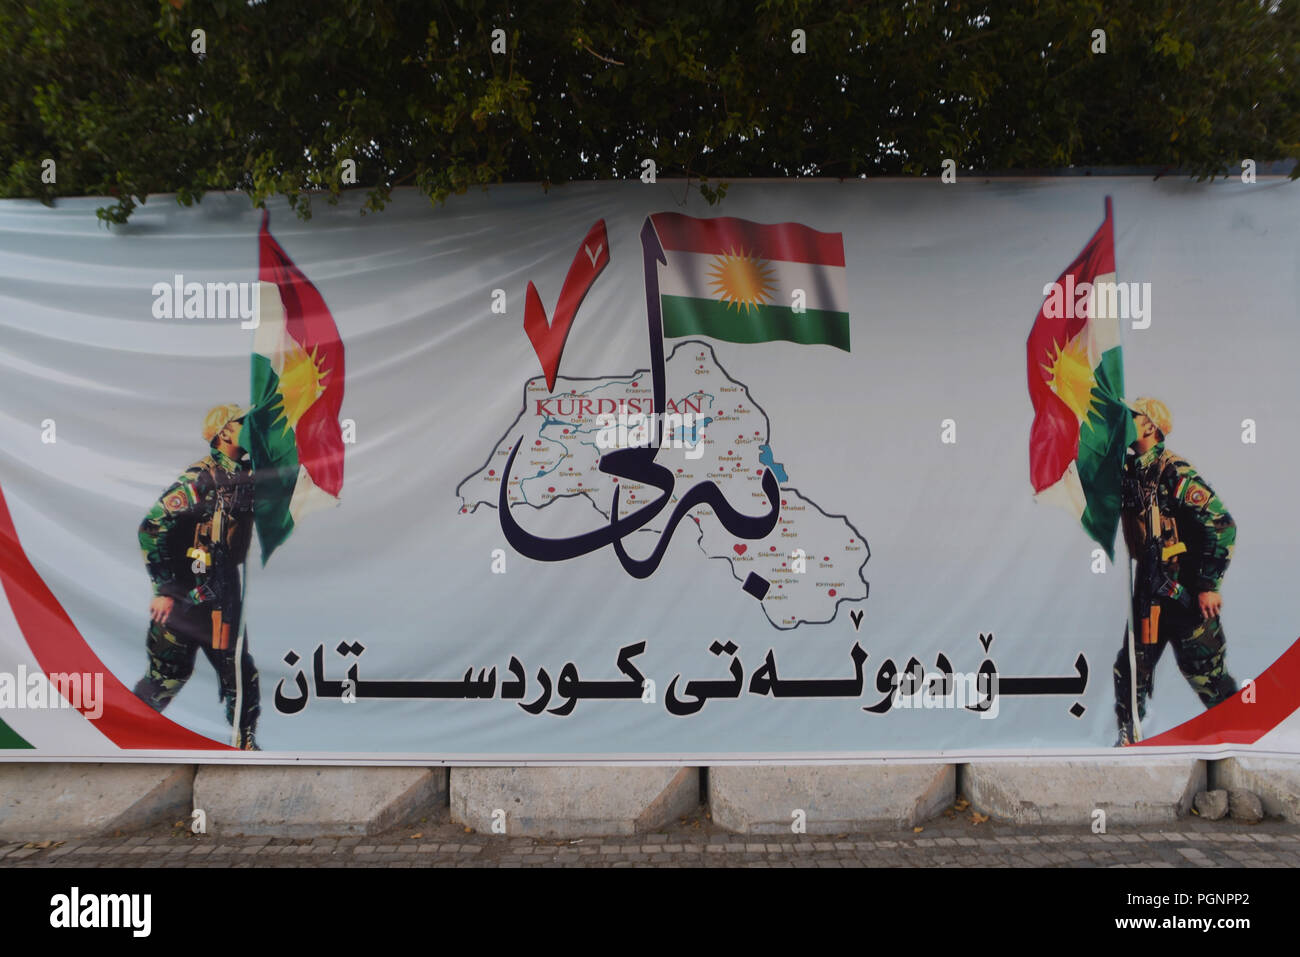 September 27, 2017 - Erbil, Kurdistan: A banner in the streets of Erbil shows a map of the territories claimed by Kurdistan as its own, including parts of Syria, Turkey, Iraq, and Iran. The Iraqi Kurdish electoral commission declared that more than 92 percent of voters backed independence from Iraq in a historic referendum. Ambiance dans les rues d'Erbil apres le referendum sur l'independance du Kurdistan irakien. *** FRANCE OUT / NO SALES TO FRENCH MEDIA *** Stock Photo